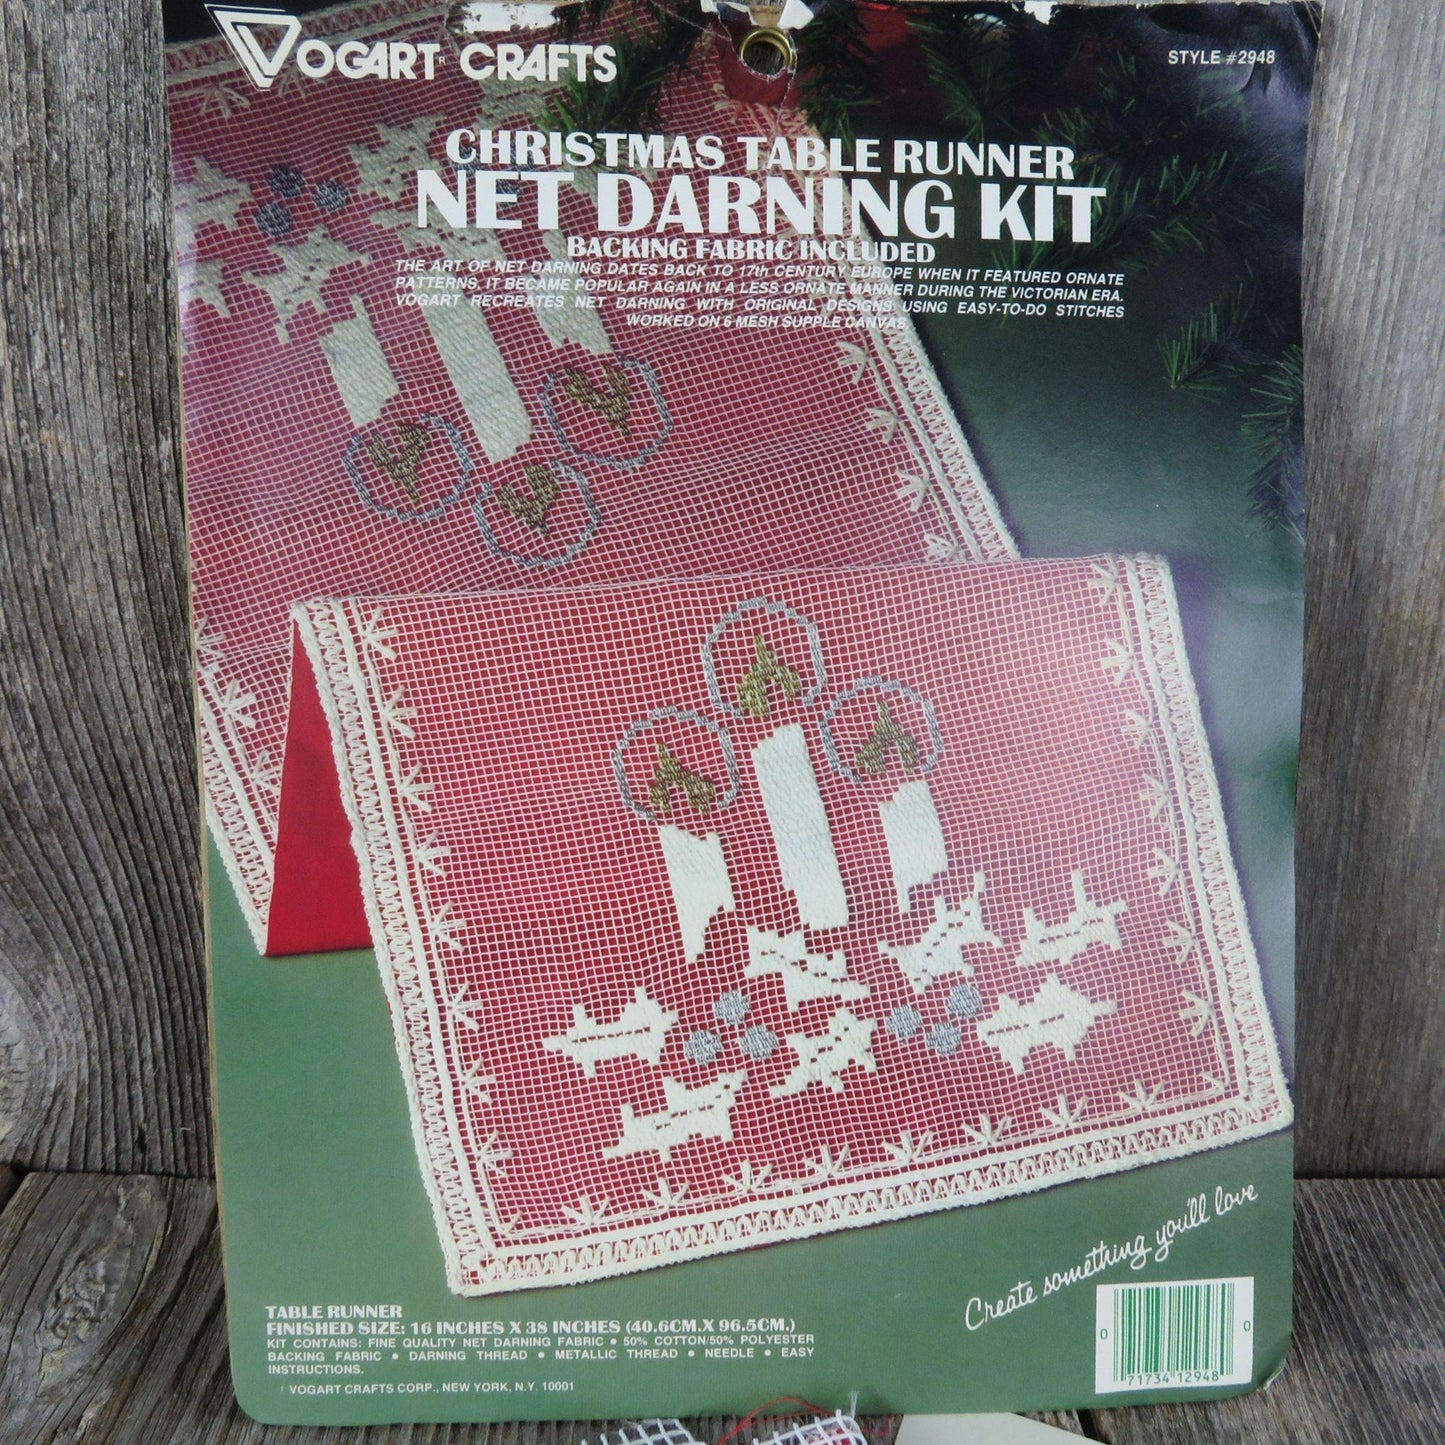 Vintage Christmas Table Runner Lace Net Darning Kit Candles Vogart Crafts 2948 Filet Lace Embroidery Craft Kit White Red